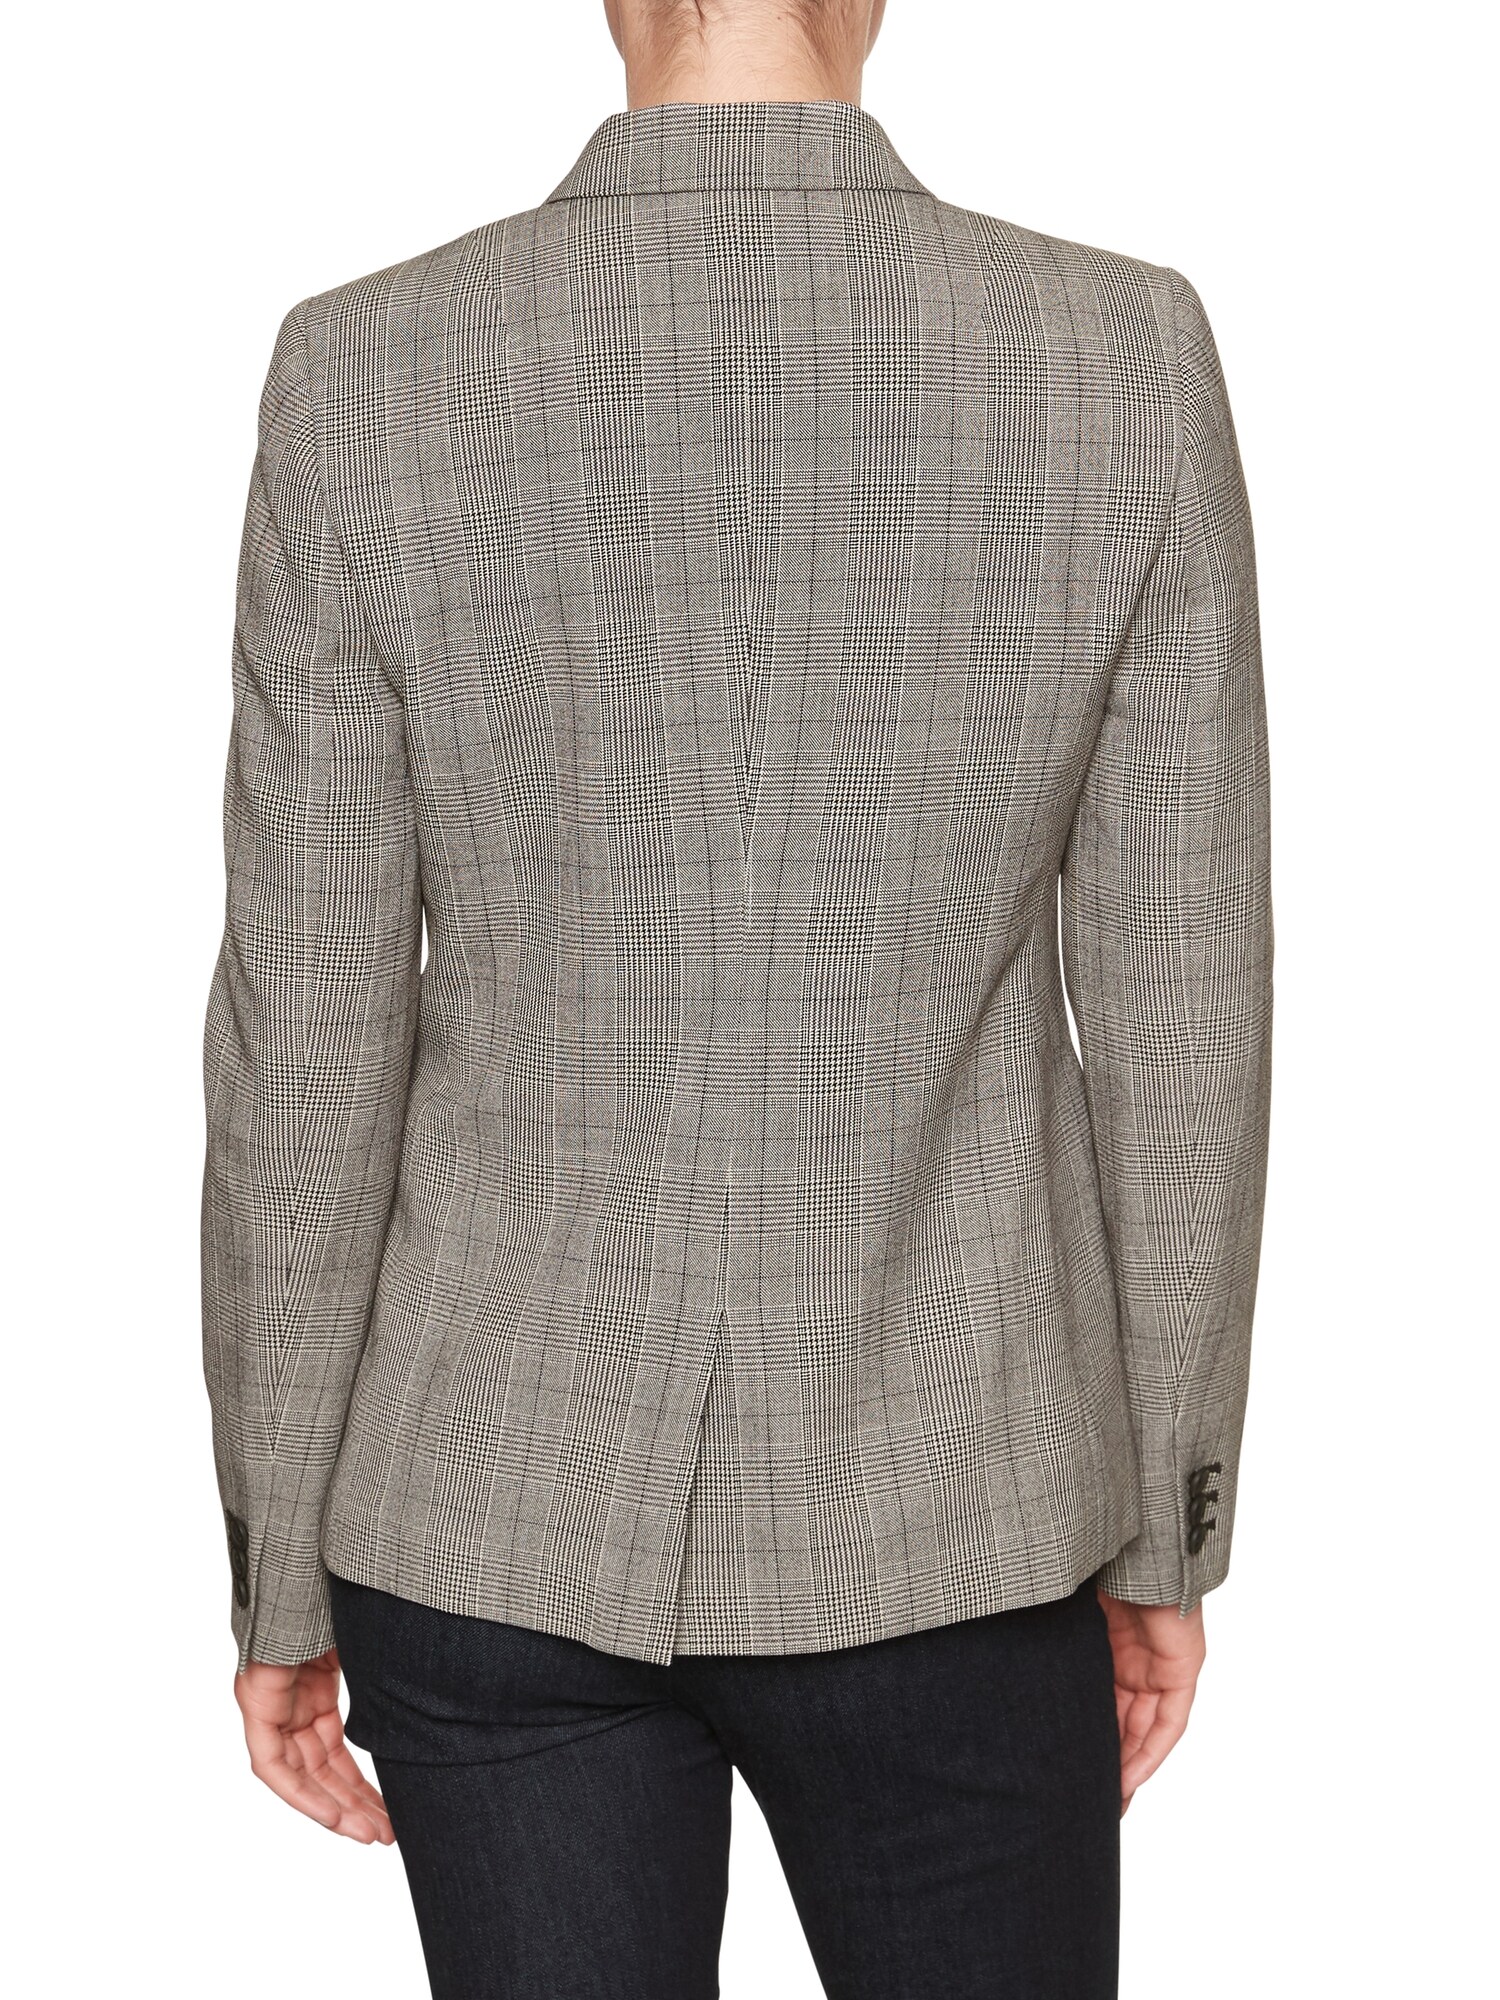 Machine Washable Plaid Double Breasted Cutaway Suit Blazer